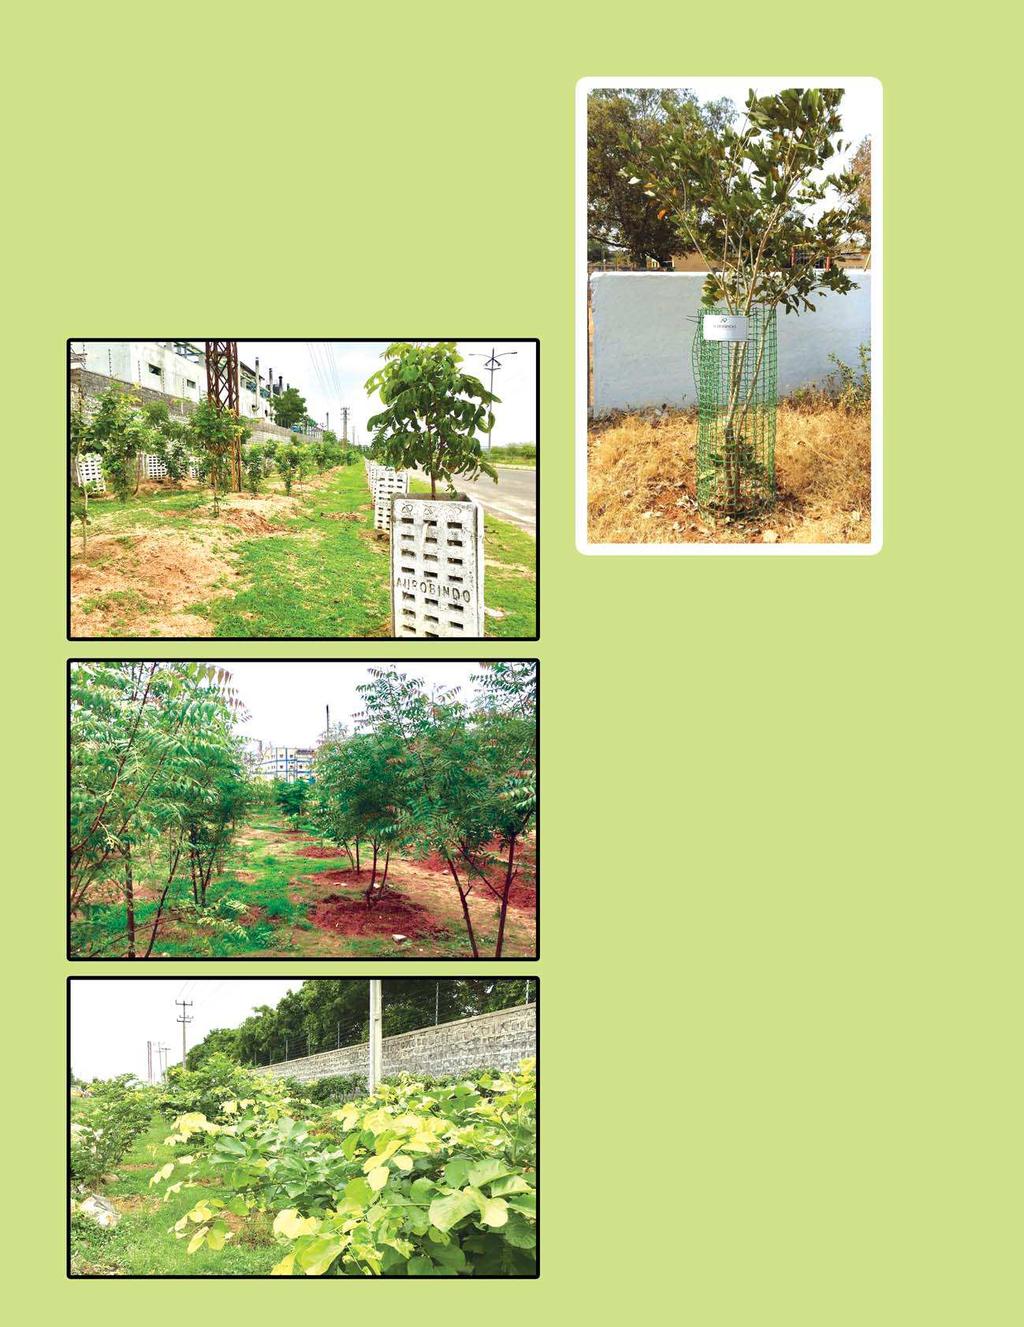 Environmental Sustainability Plantation rate gradually decreased with the daily growing constructions.